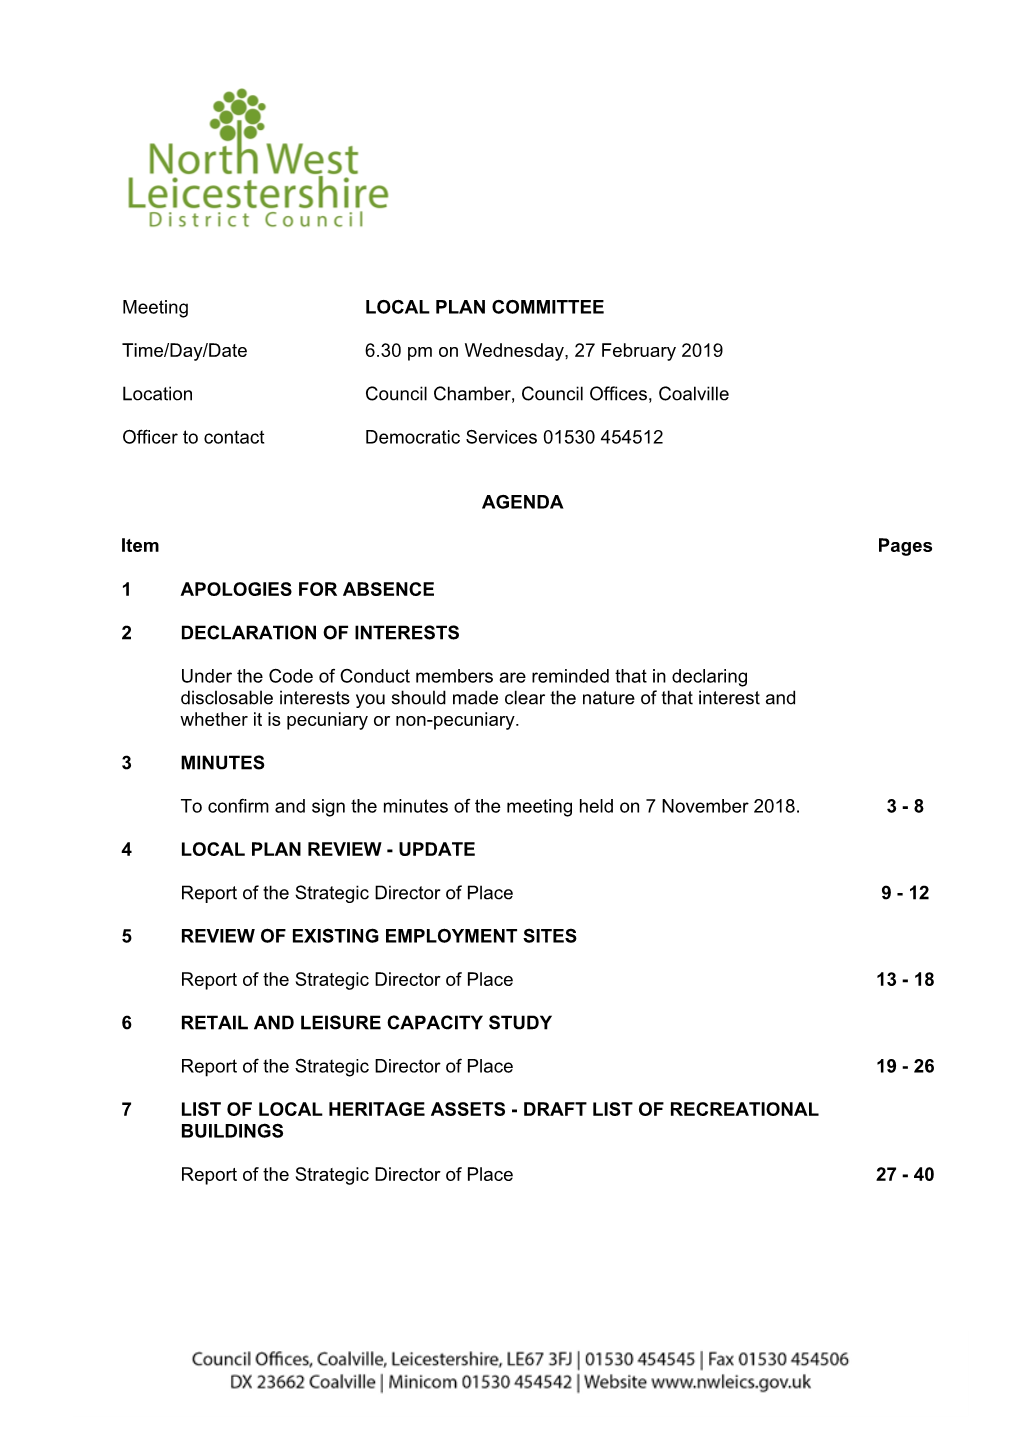 (Public Pack)Agenda Document for Local Plan Committee, 27/02/2019